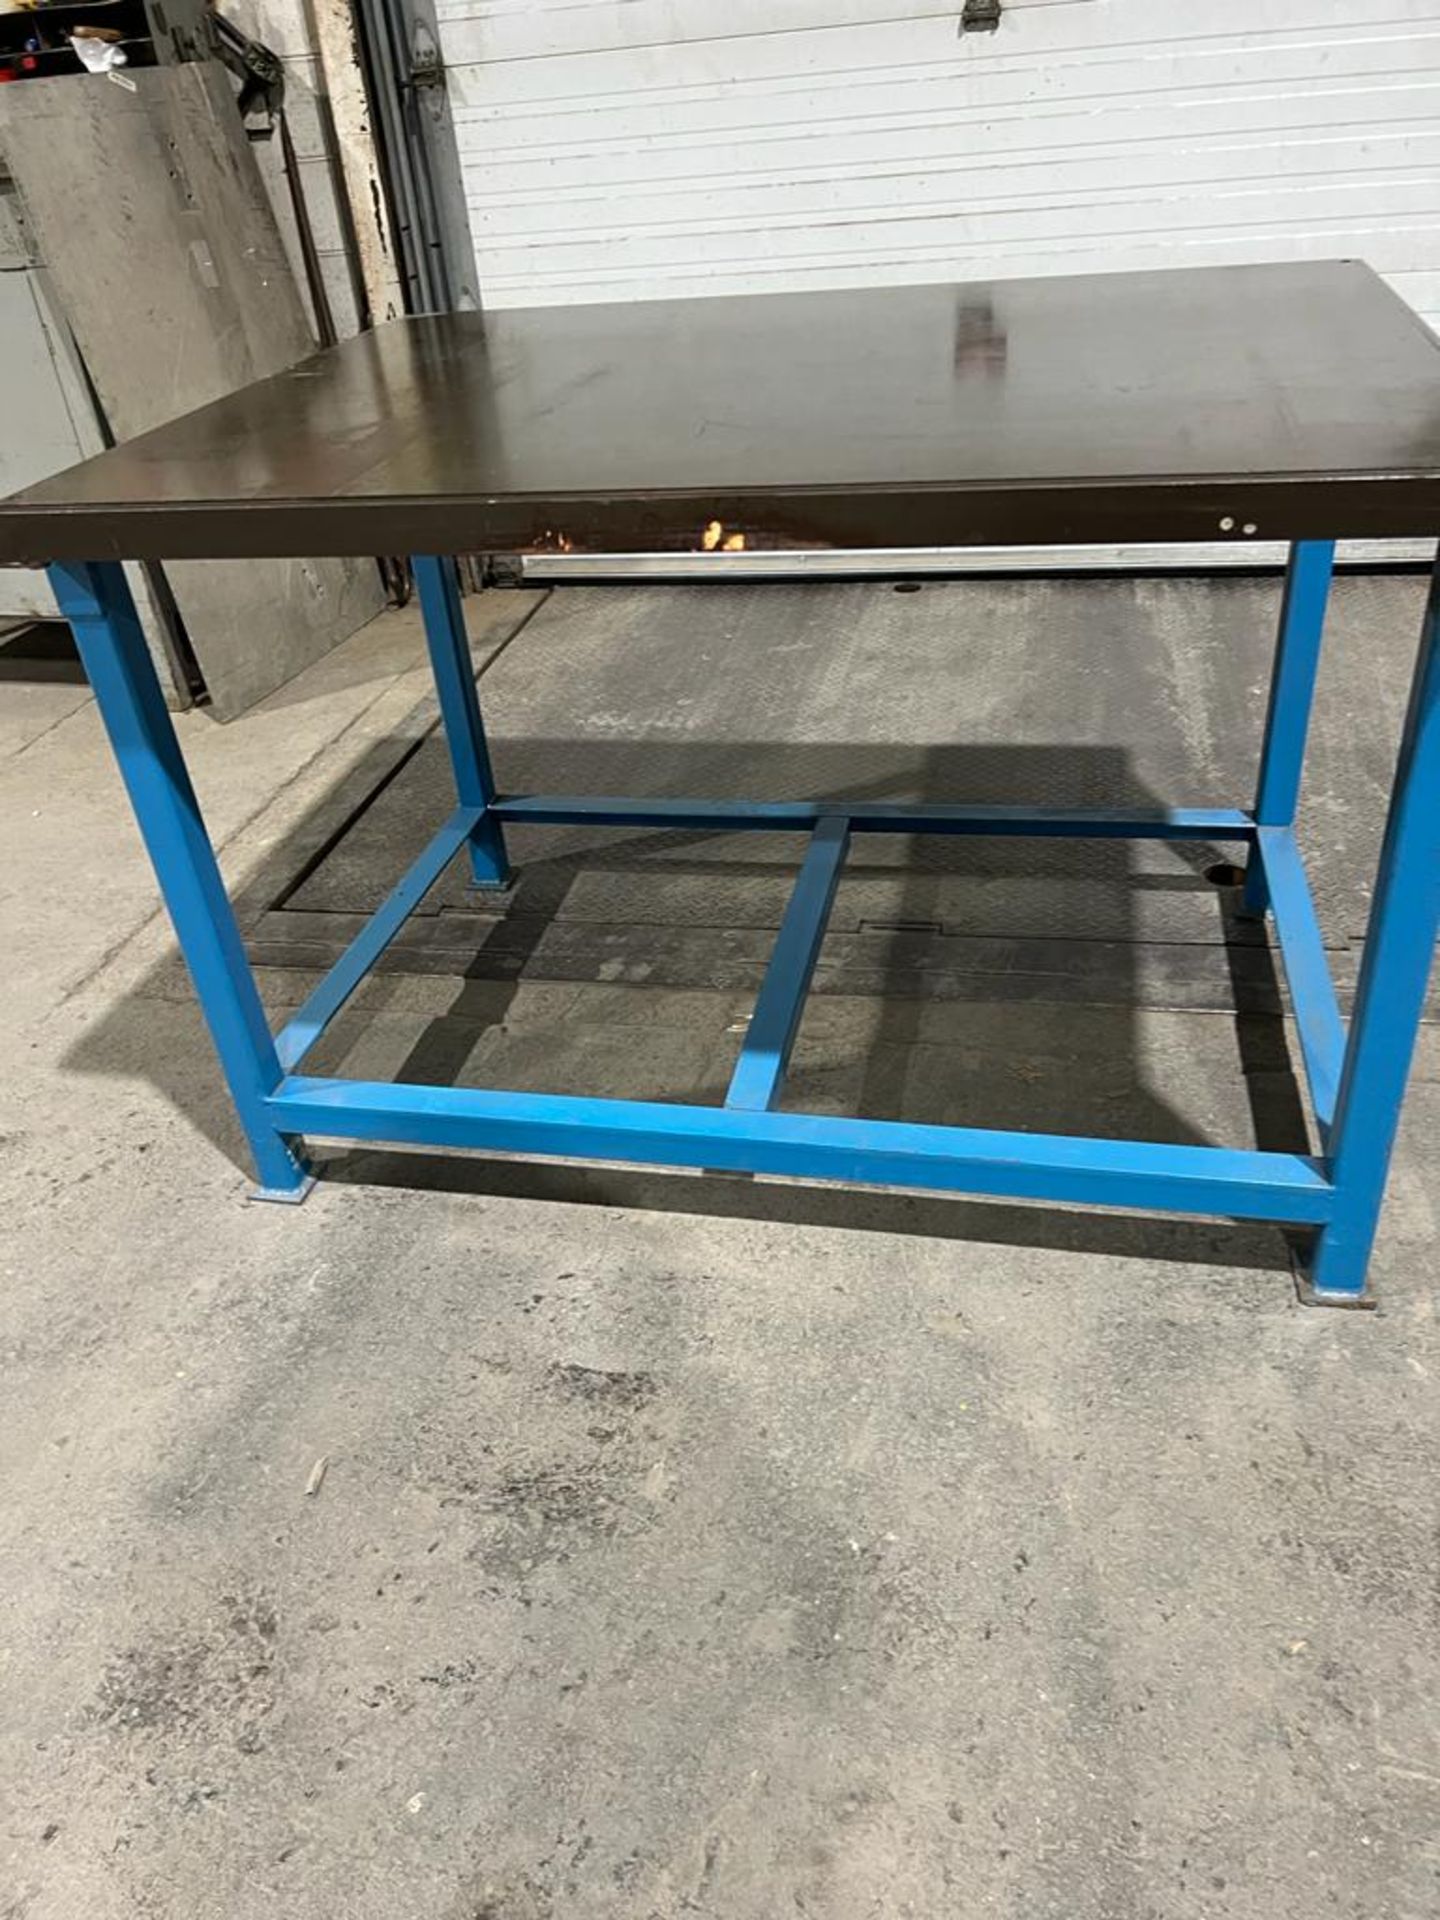 Heavy Duty Steel Work Table 50x40" tabletop dimensions - Image 3 of 3